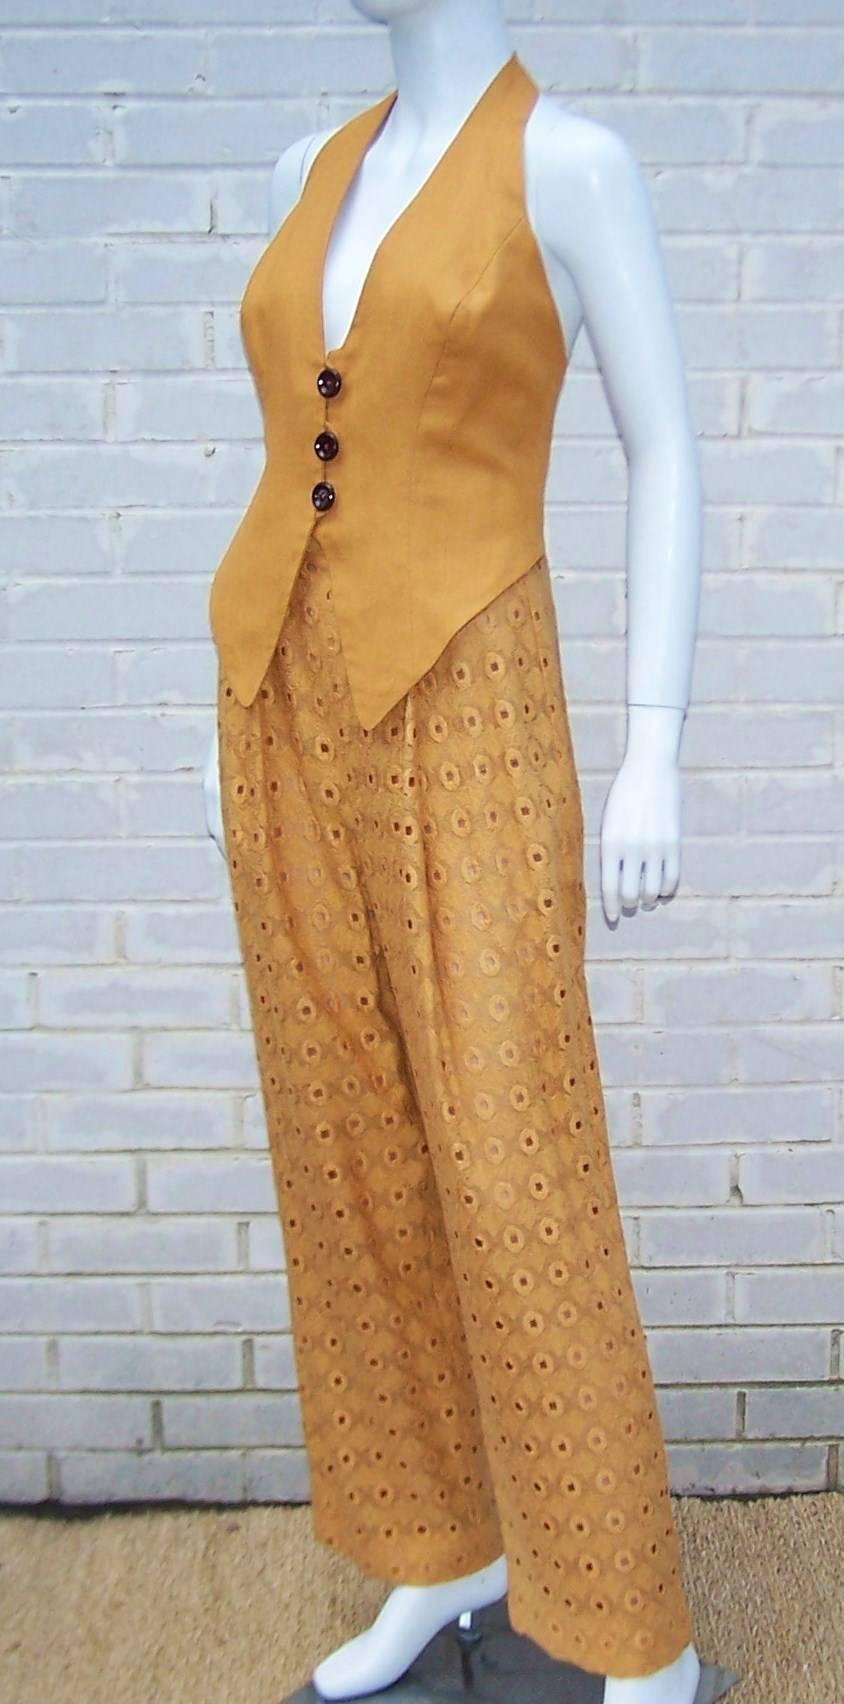 Bob Mackie has managed to make menswear look feminine and sassy with this 3-piece pant ensemble for his Collection II line.  The pumpkin color linen halter is fully lined and sports contrasting buttons with a menswear style waistcoat front.  It can